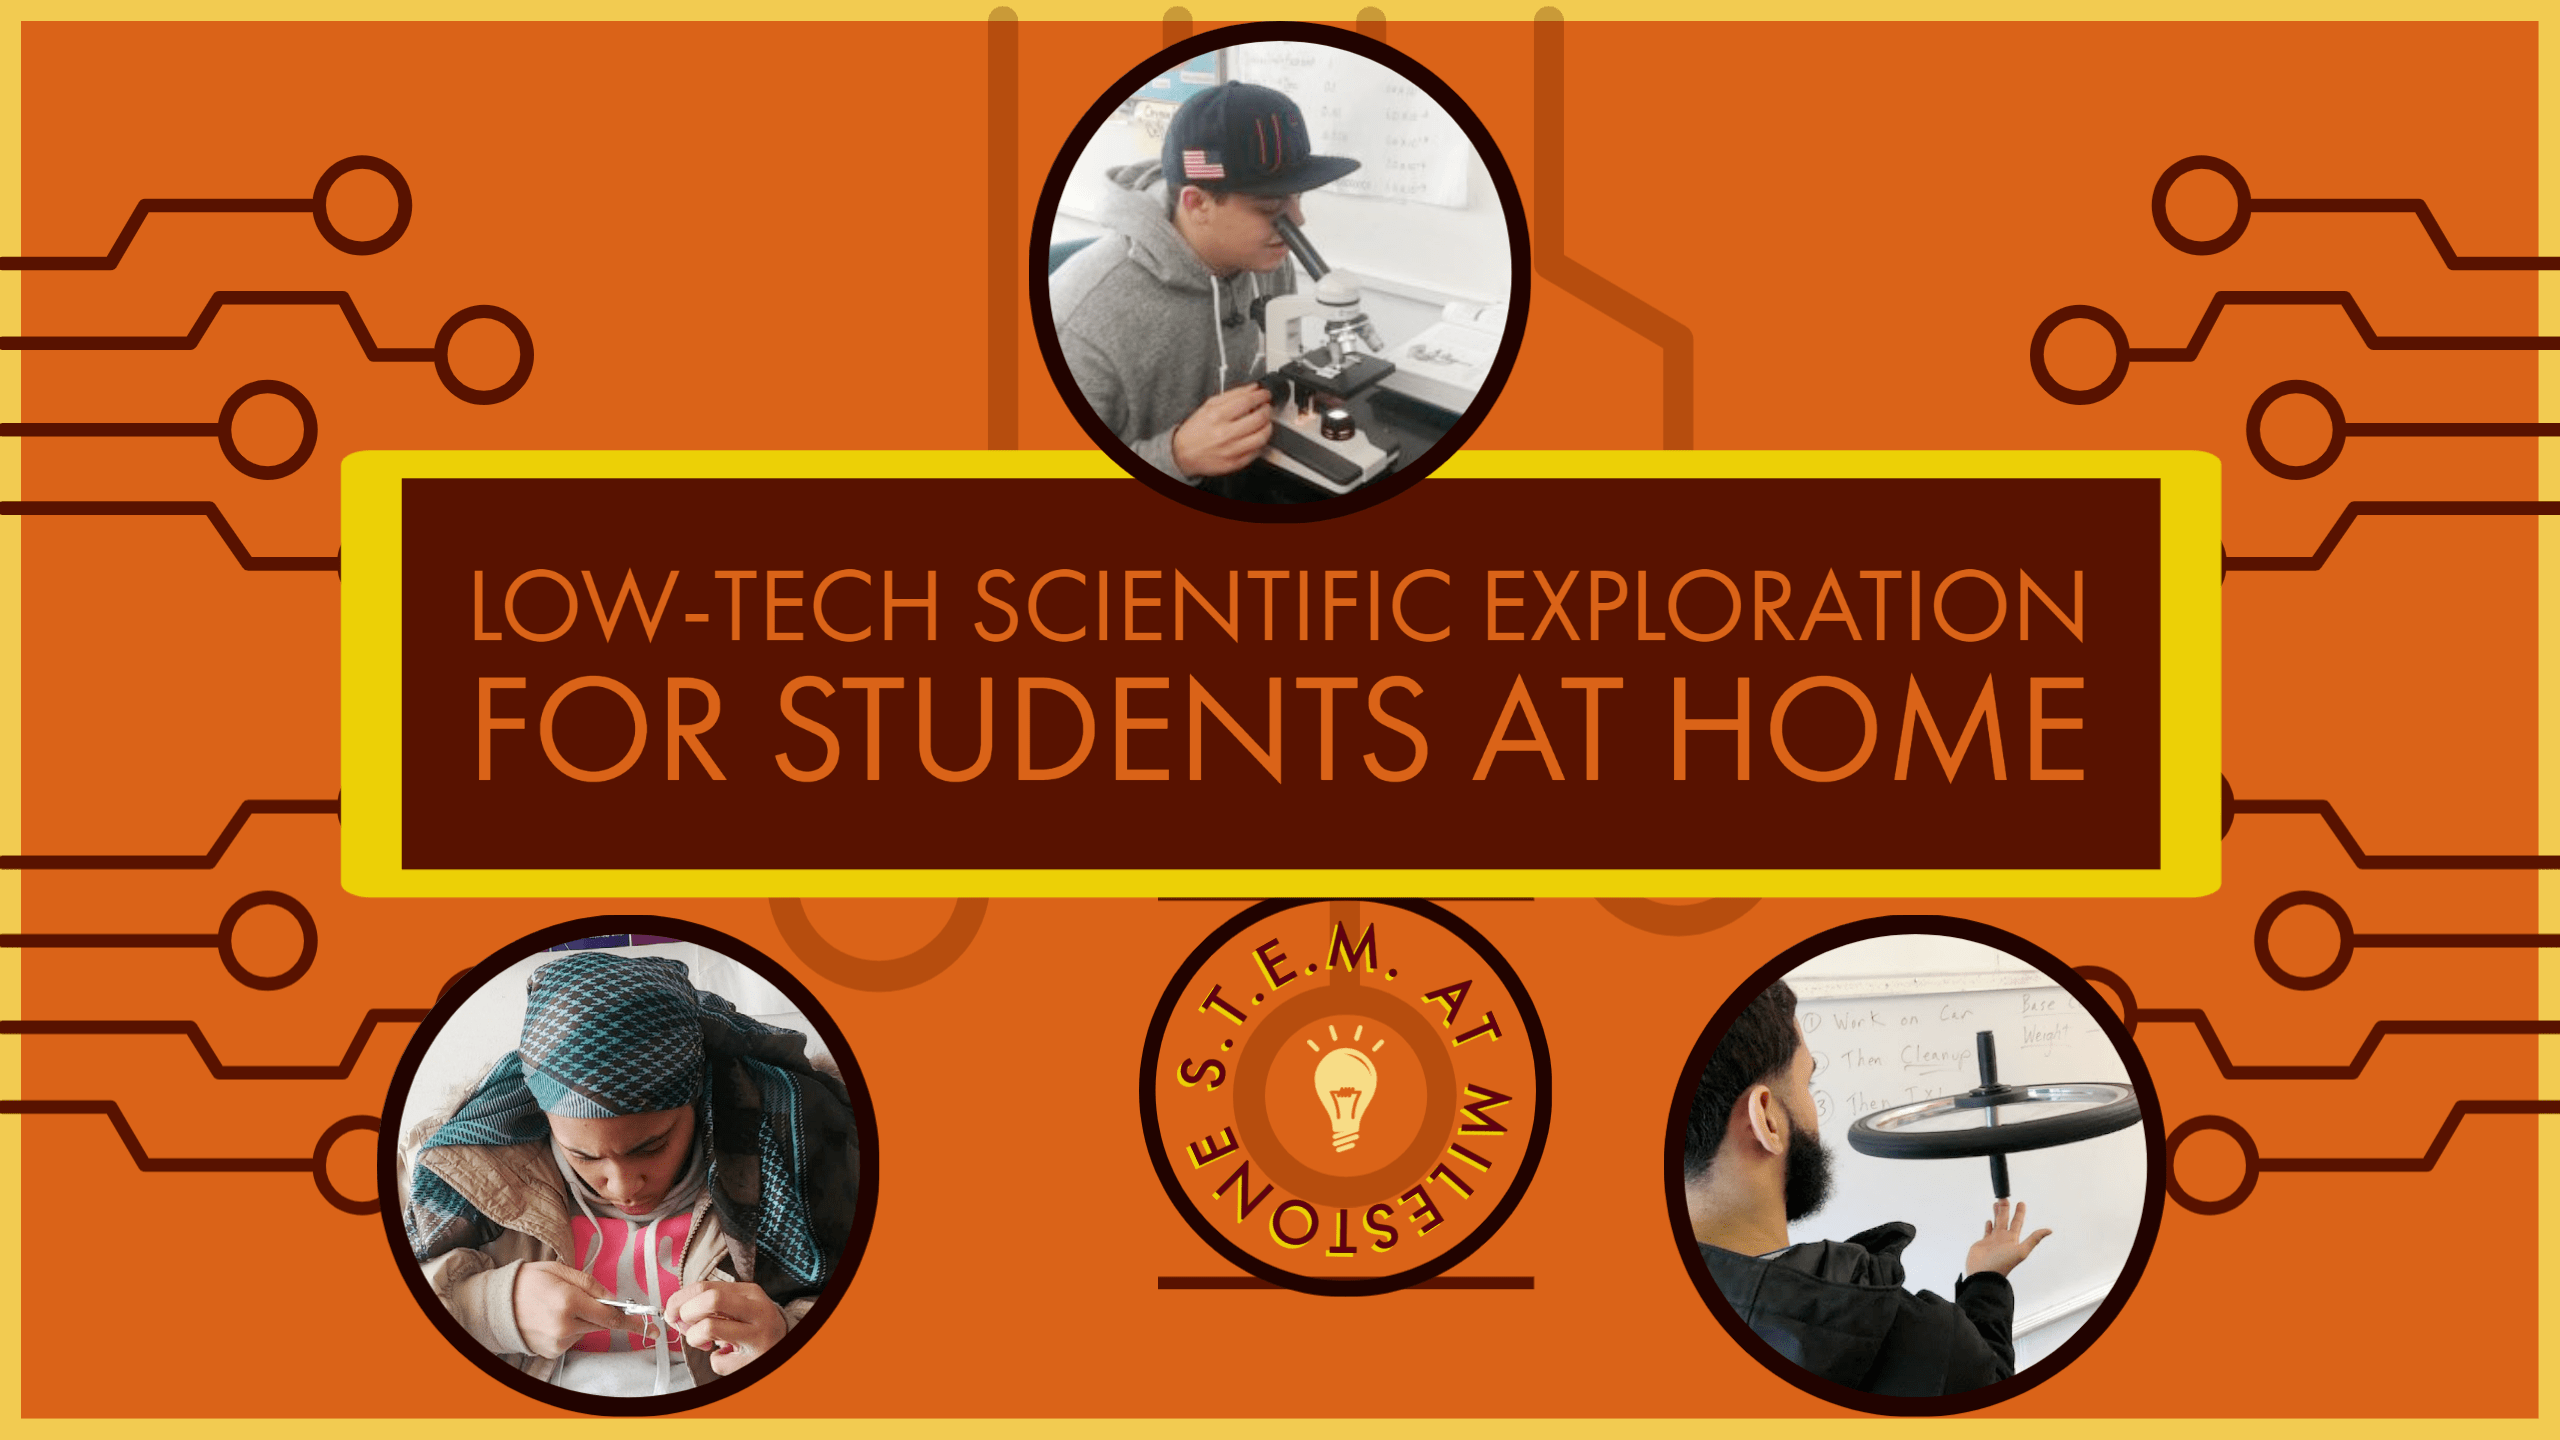 Low-Tech Scientific Exploration for Students at Home